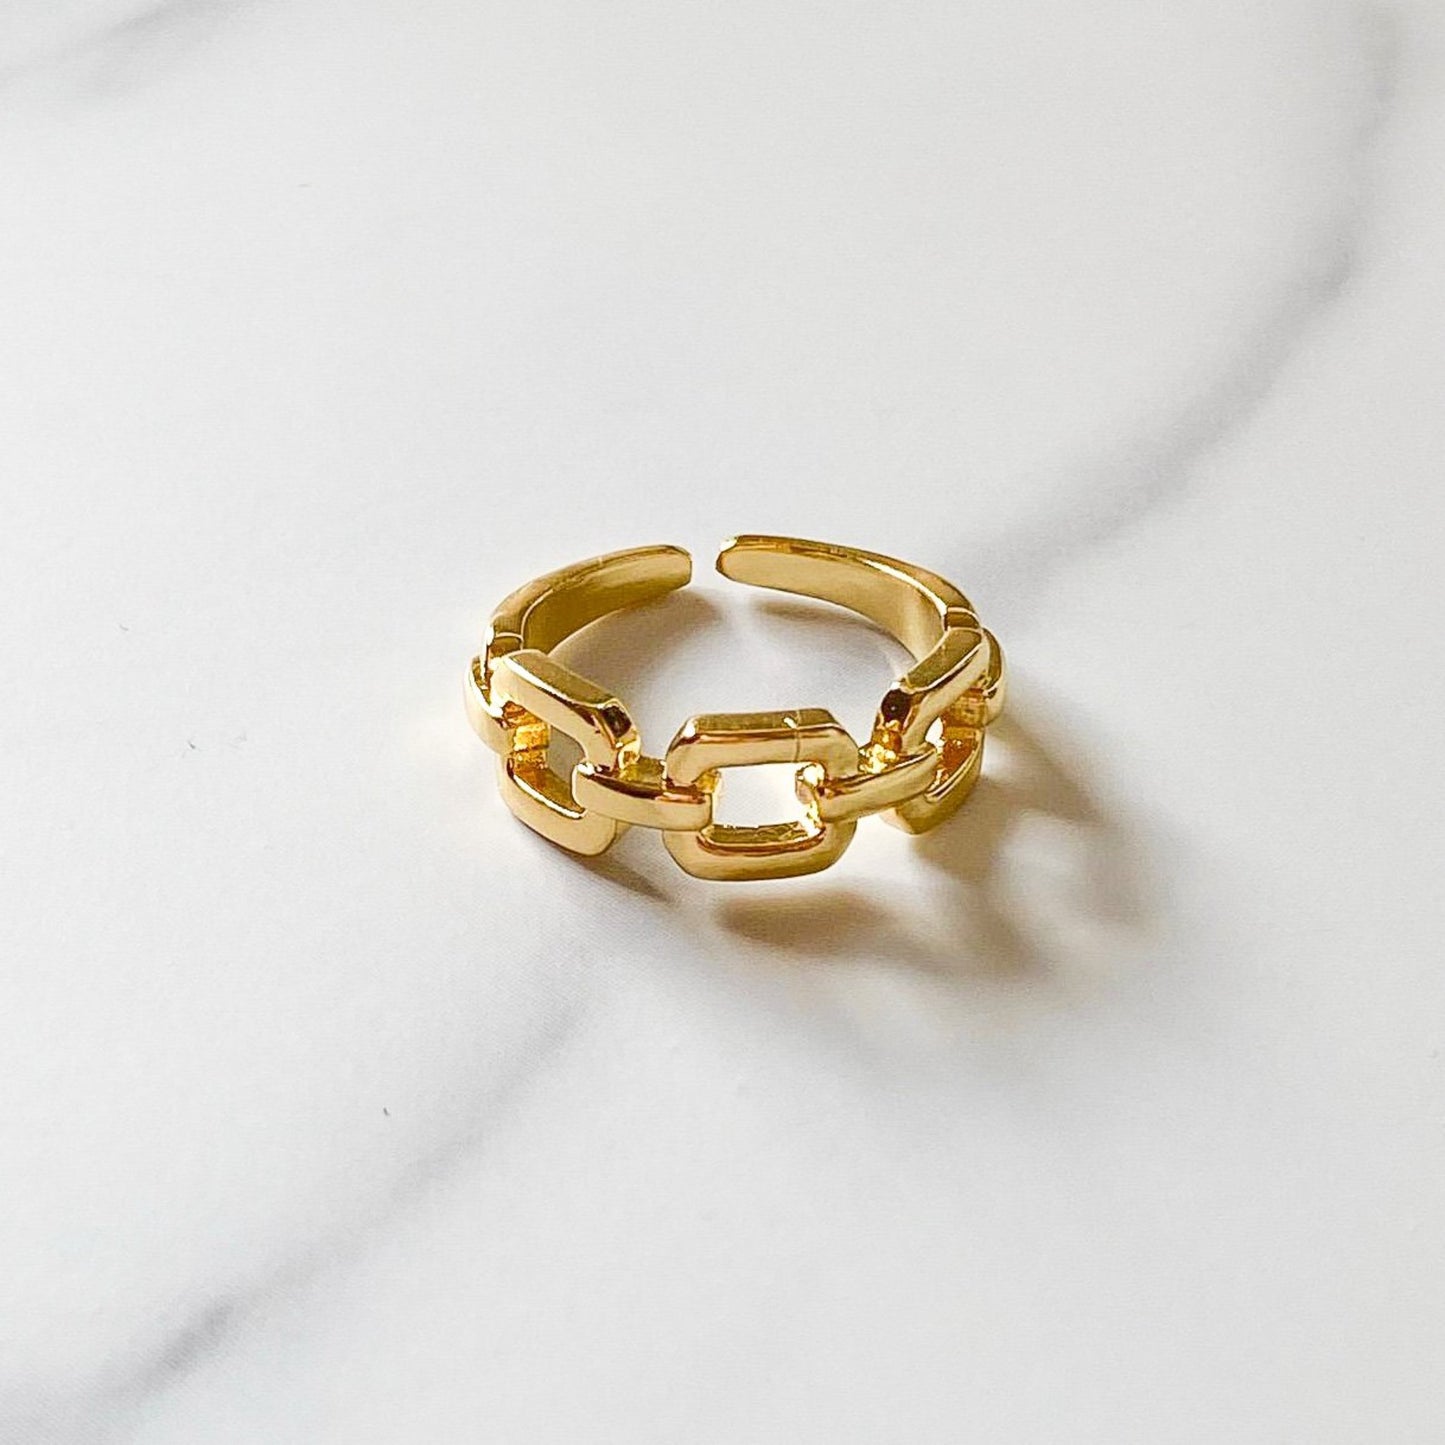 Becca Gold-filled ring by ISVI Boutique Miami, water resistant, adjustable and hypoallergenic ring, made in Brazil